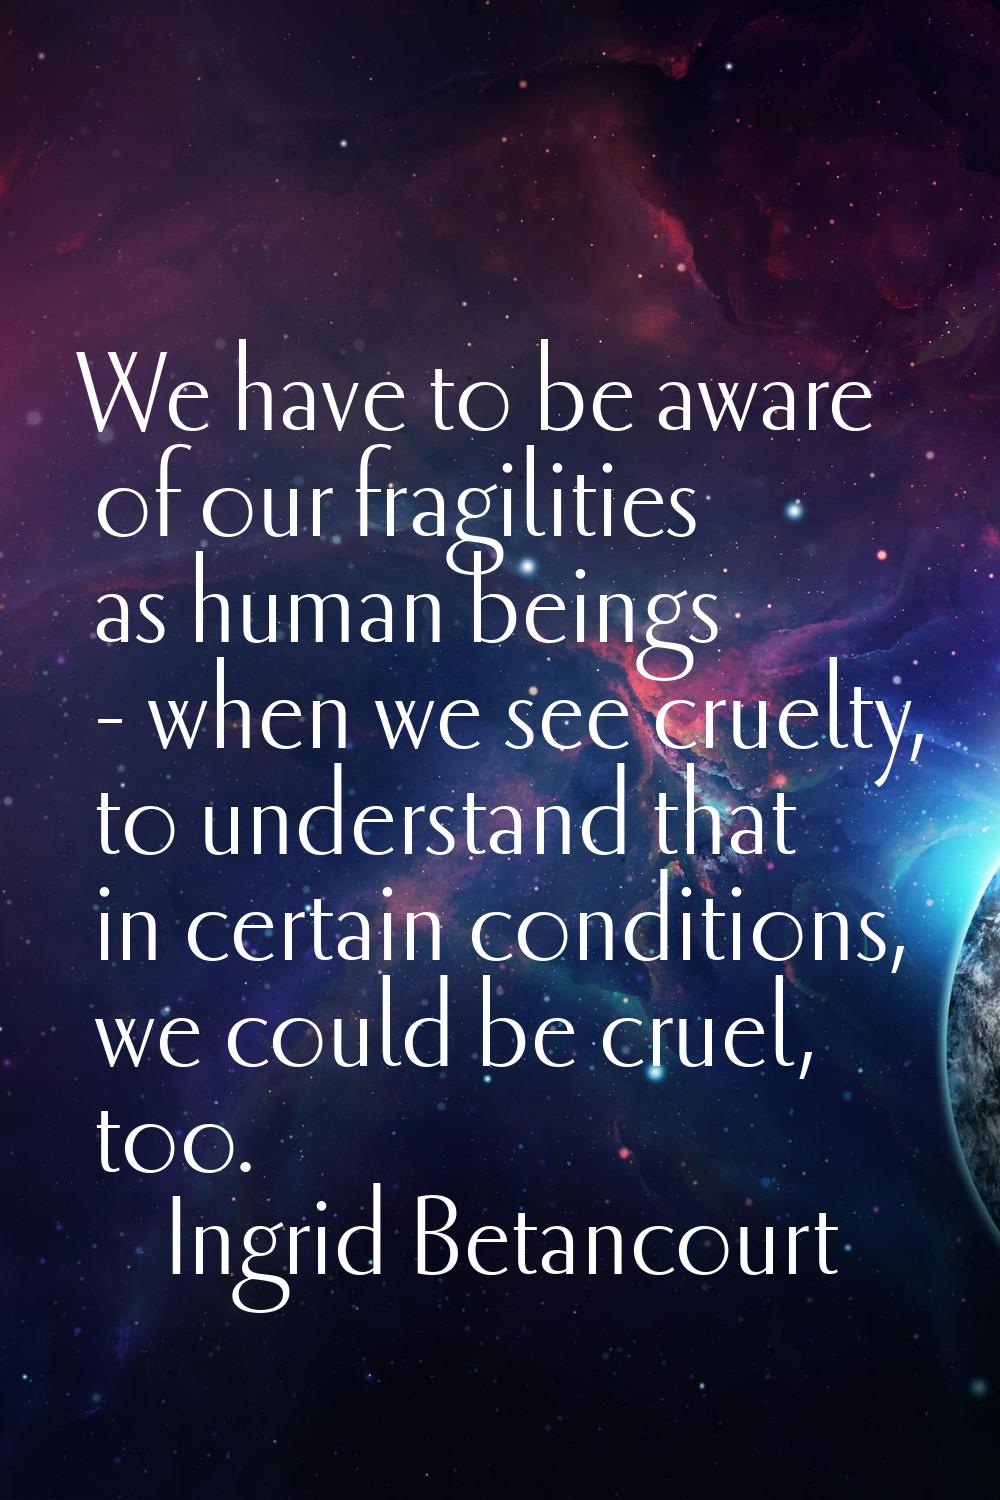 We have to be aware of our fragilities as human beings - when we see cruelty, to understand that in